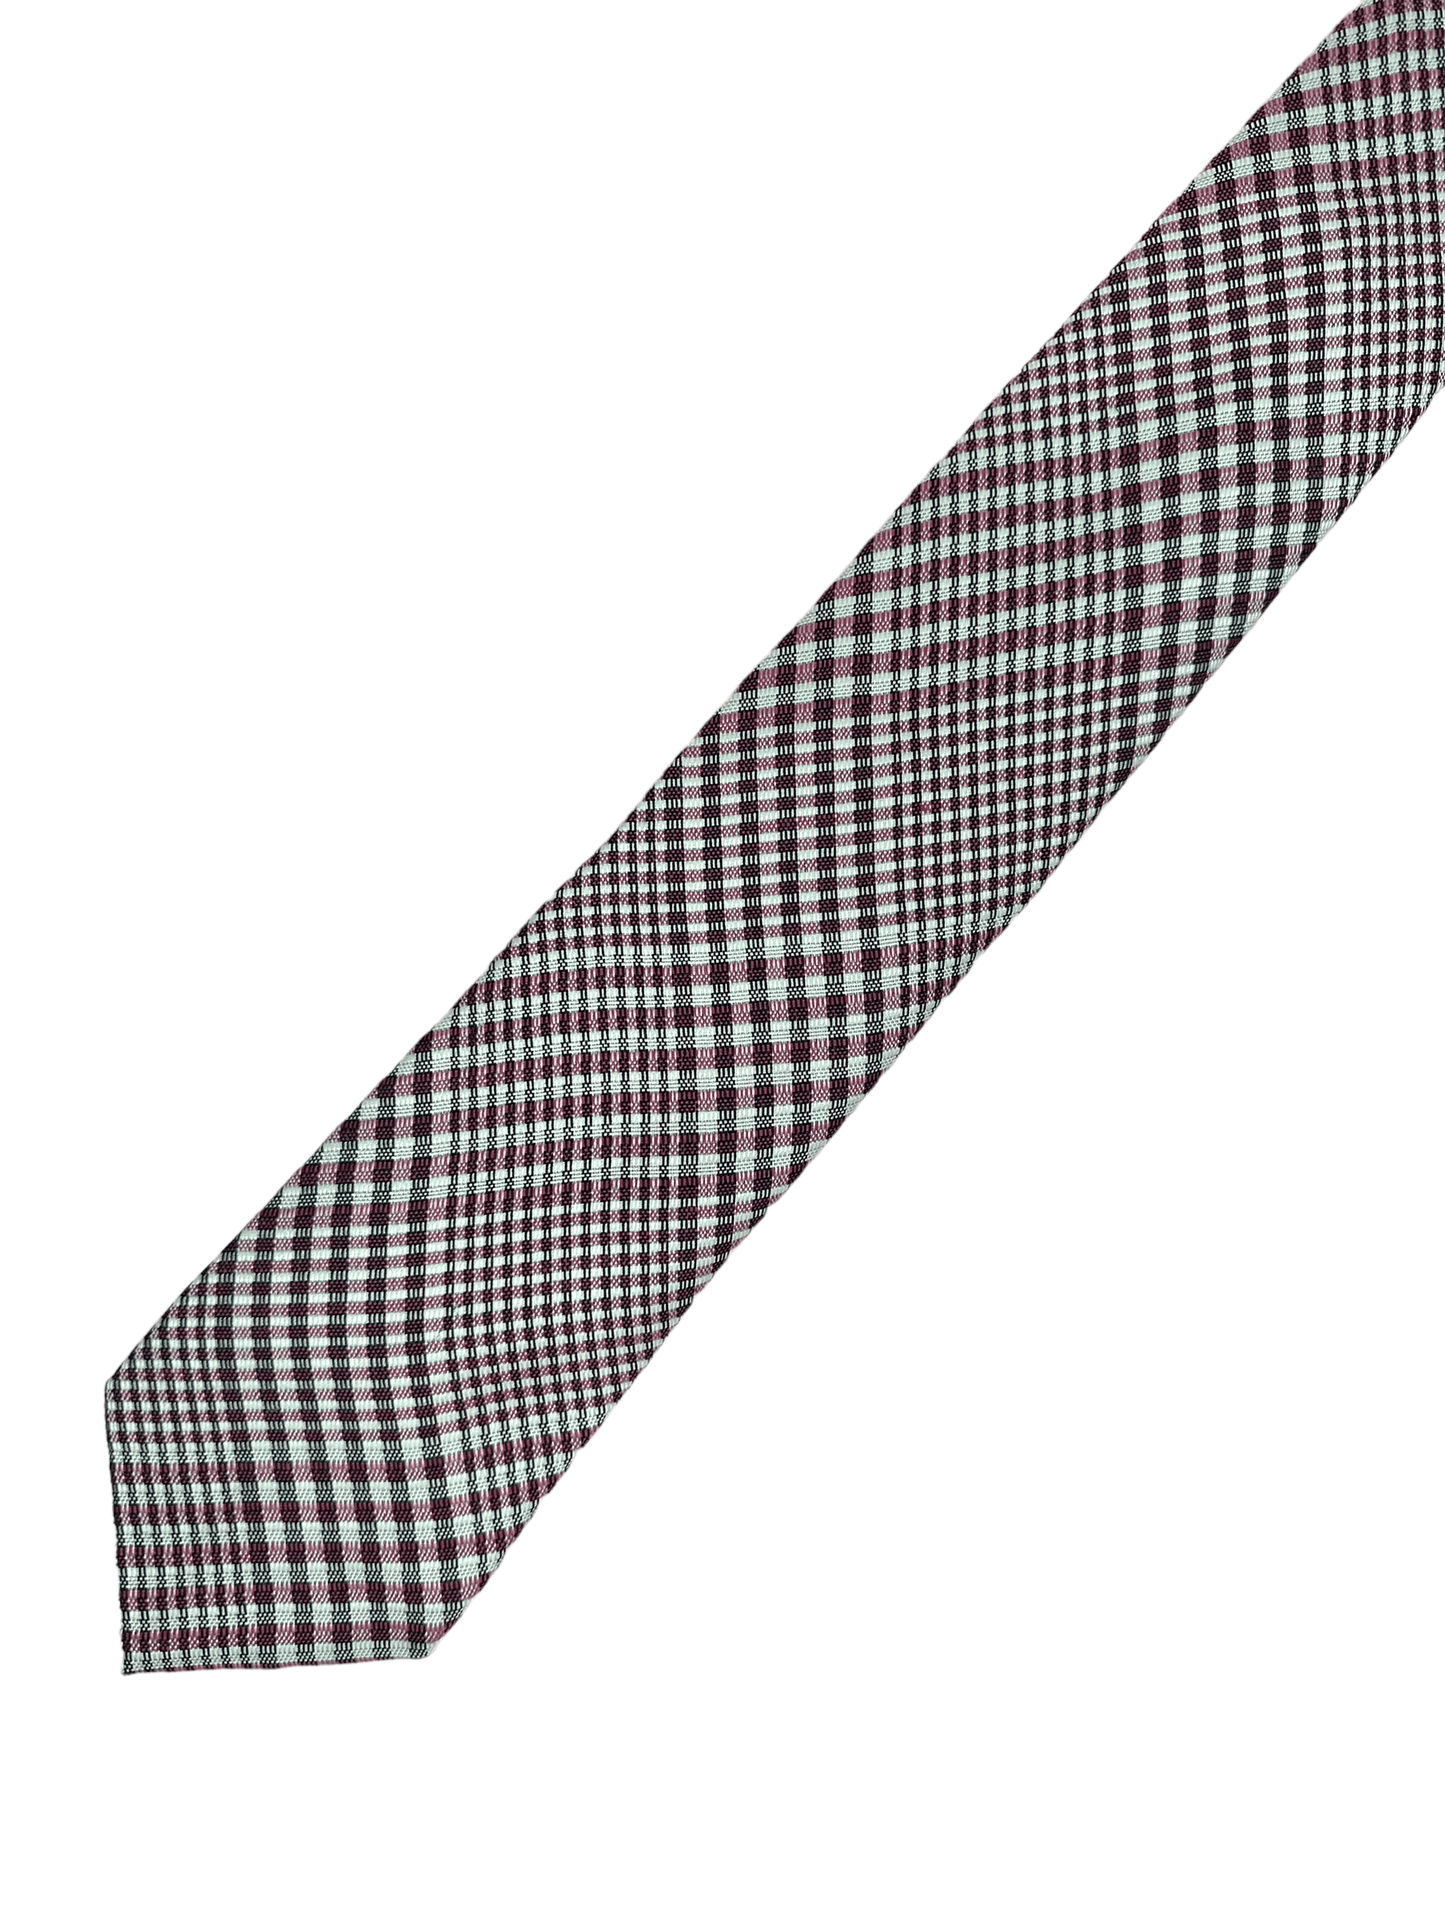 Tom Ford Red Plaid Silk Tie - Genuine Design luxury consignment Calgary, Alberta, Canada New & pre-owned clothing, shoes, accessories.